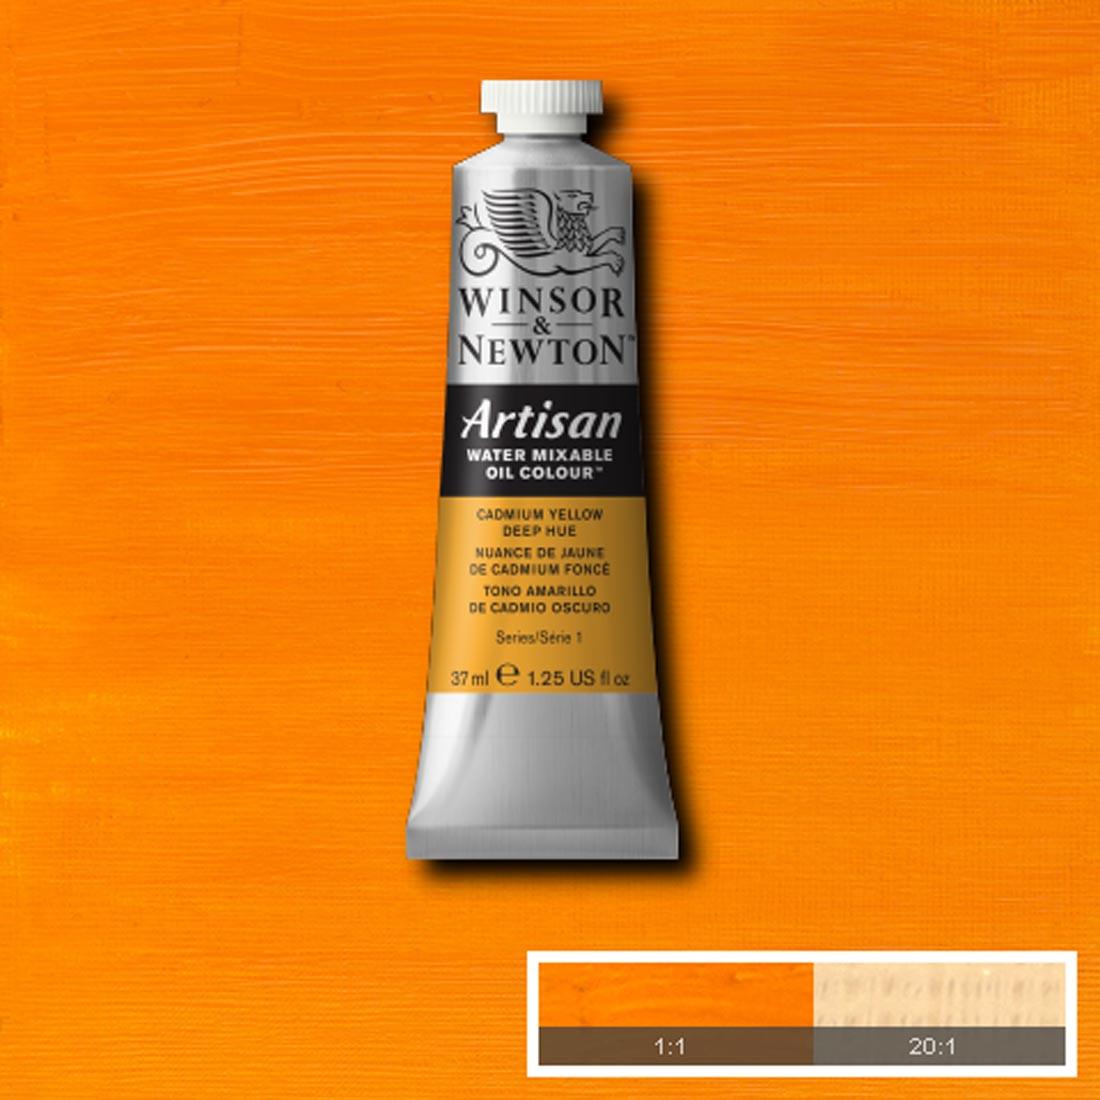 Tube of Cadmium Yellow Deep Hue Winsor & Newton Artisan Water Mixable Oil Colour with a paint swatch for the background